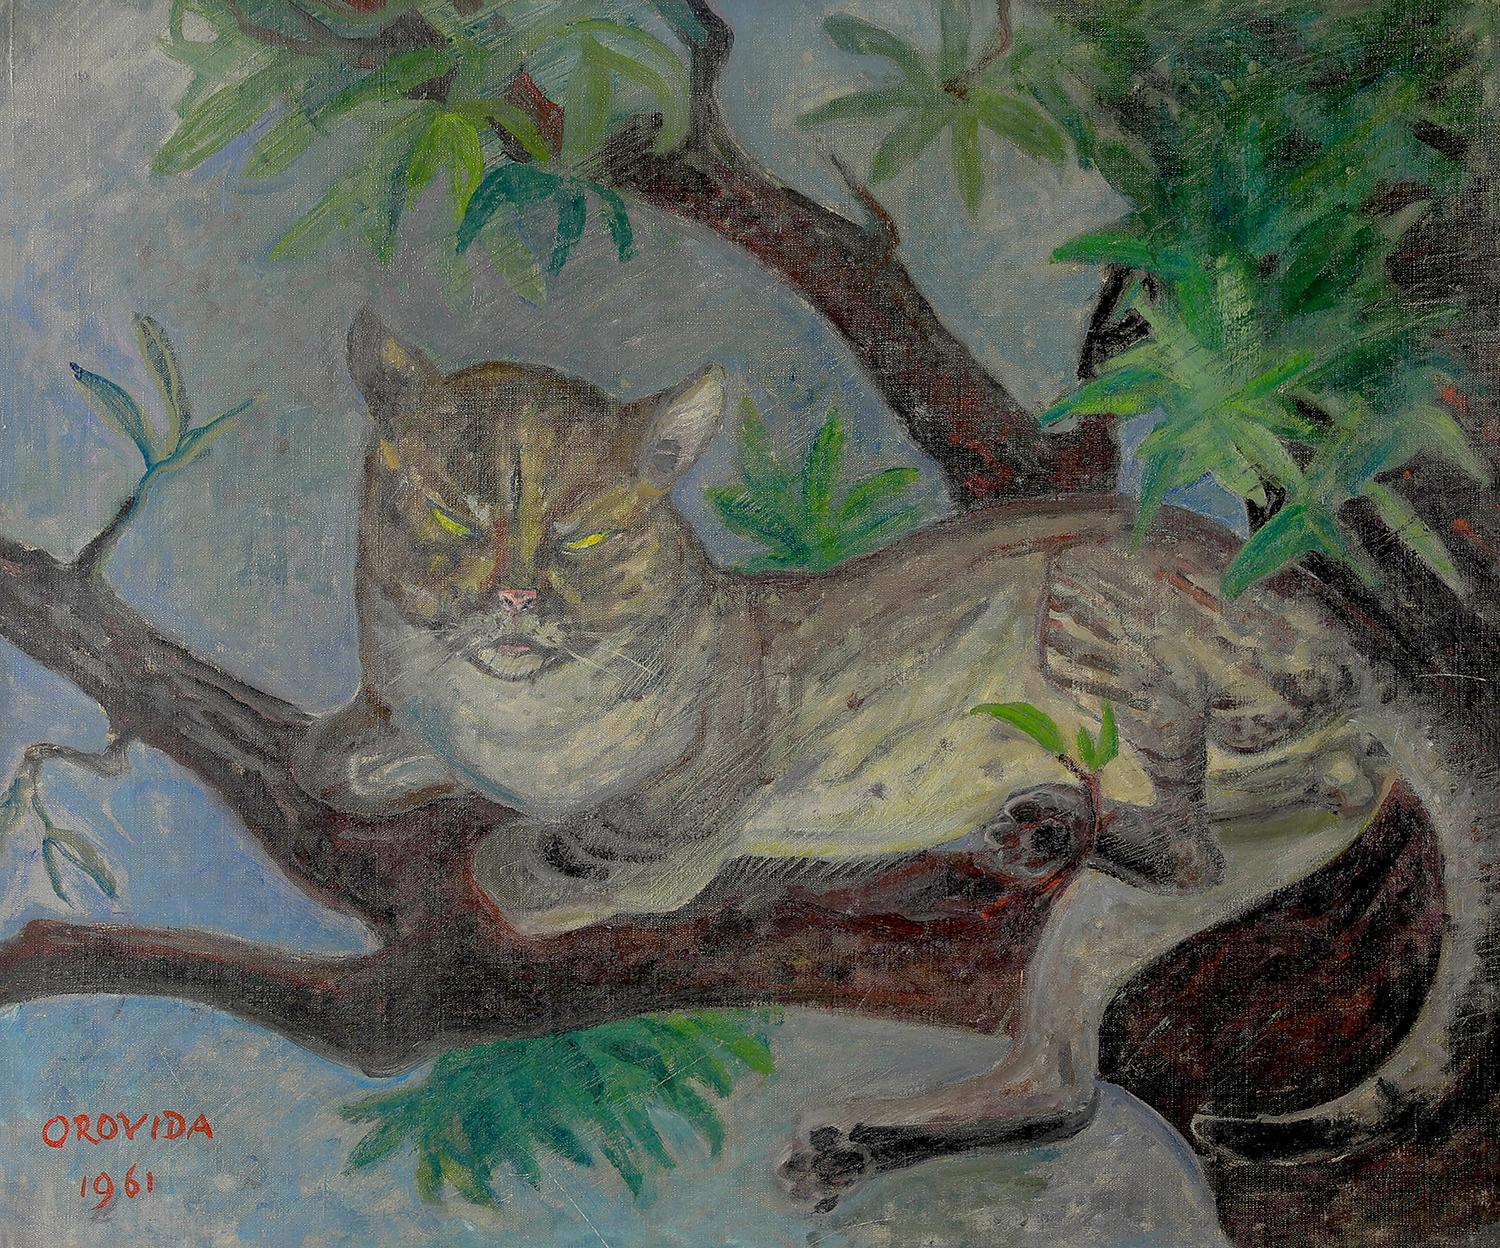 Tom Cat by Orovida Pissarro (1893-1968)
Oil on canvas
51 x 61 cm (20 ¹/₈ x 24 inches)
Signed and dated lower left Orovida 1961

Provenance
Collection of Carel Weight
Private collection, London

Literature
K L Erickson, Orovida Pissarro: Painter and